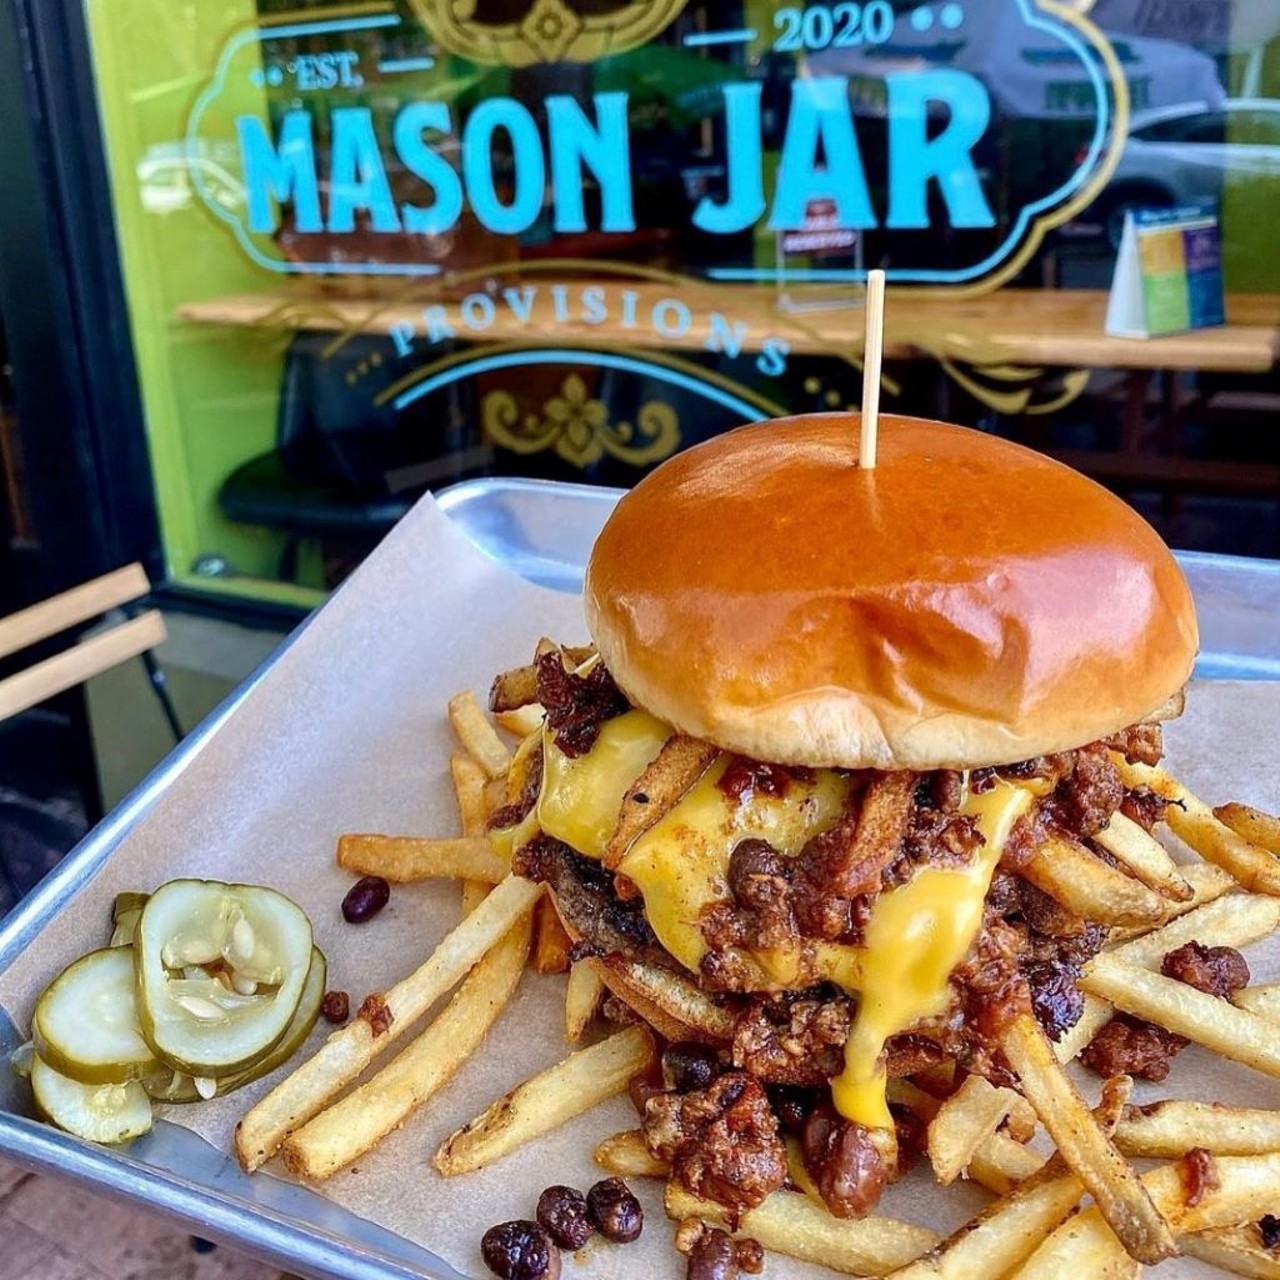 Mason Jar Provisions 
407-270-4322, 805 E. Washington St.
This Southern-inspired scratch kitchen has a menu packed with classic American dishes, and nothing quite says Americana more than a chili cheese smash burger. 
Photo via Mason Jar Provisions/Facebook